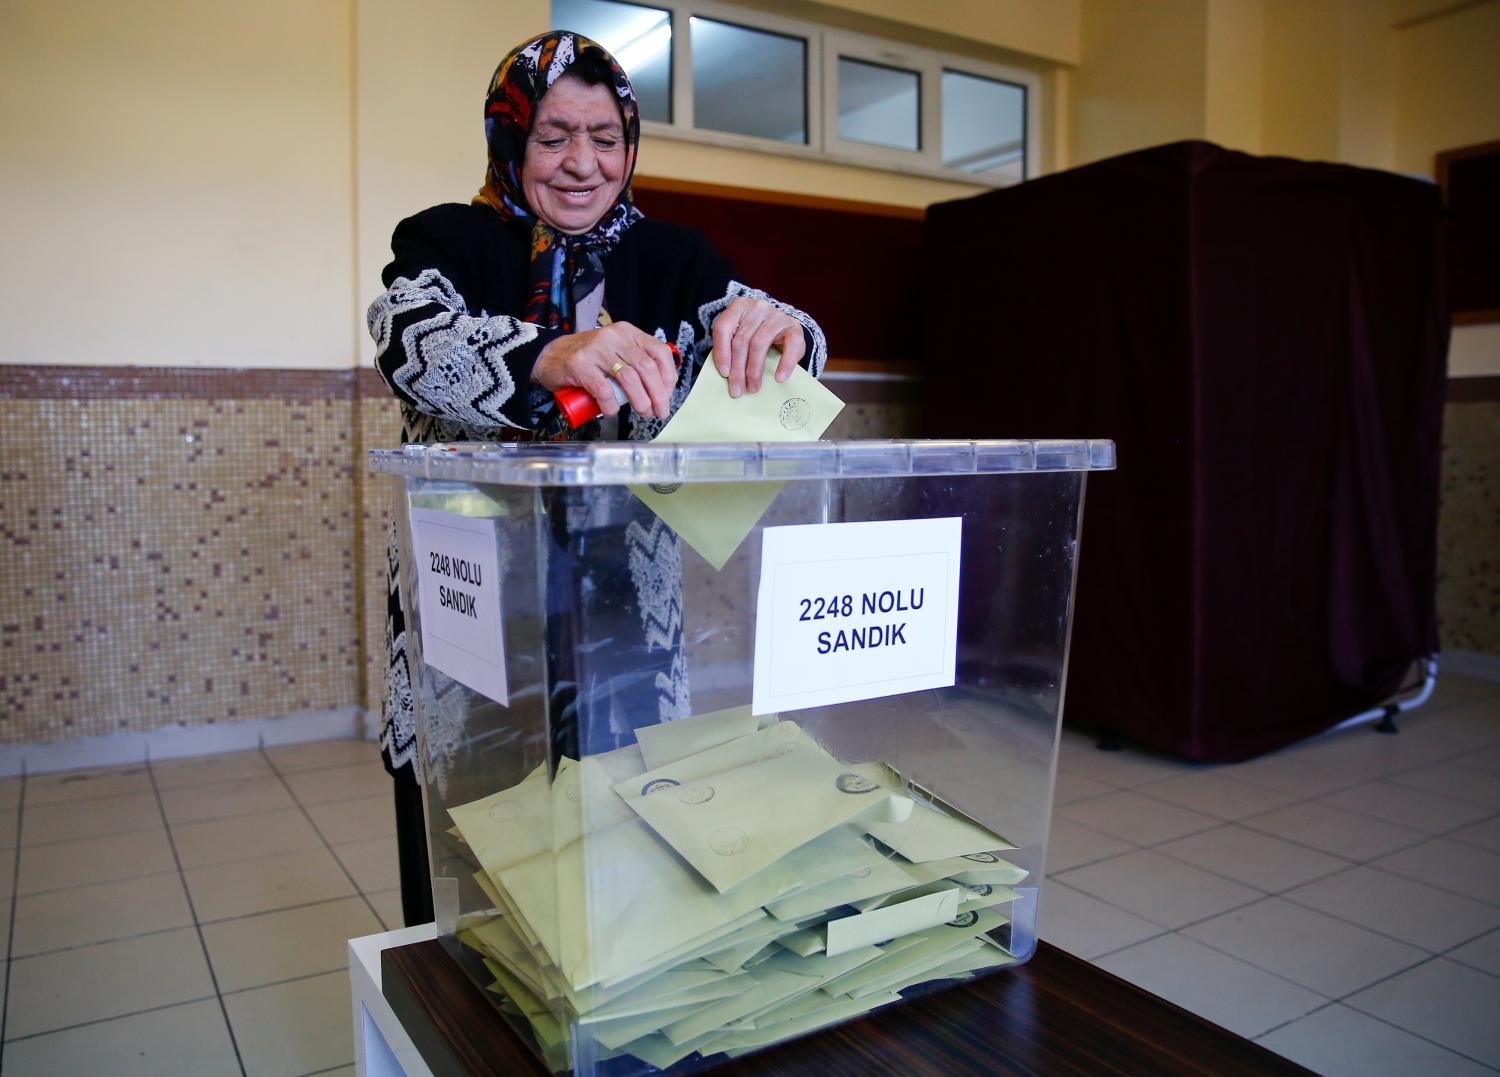 A woman casts her ballot at a polling station during a general election in Konya, Turkey, November 1, 2015. Turks began voting on Sunday amid worsening security and economic worries in a snap parliamentary election that could profoundly impact the divided country's trajectory and that of President Tayyip Erdogan. The parliamentary poll is the second in five months, after the ruling AK Party founded by Erdogan failed to retain its single-party majority in June. REUTERS/Umit Bektas - RTX1U7LQ